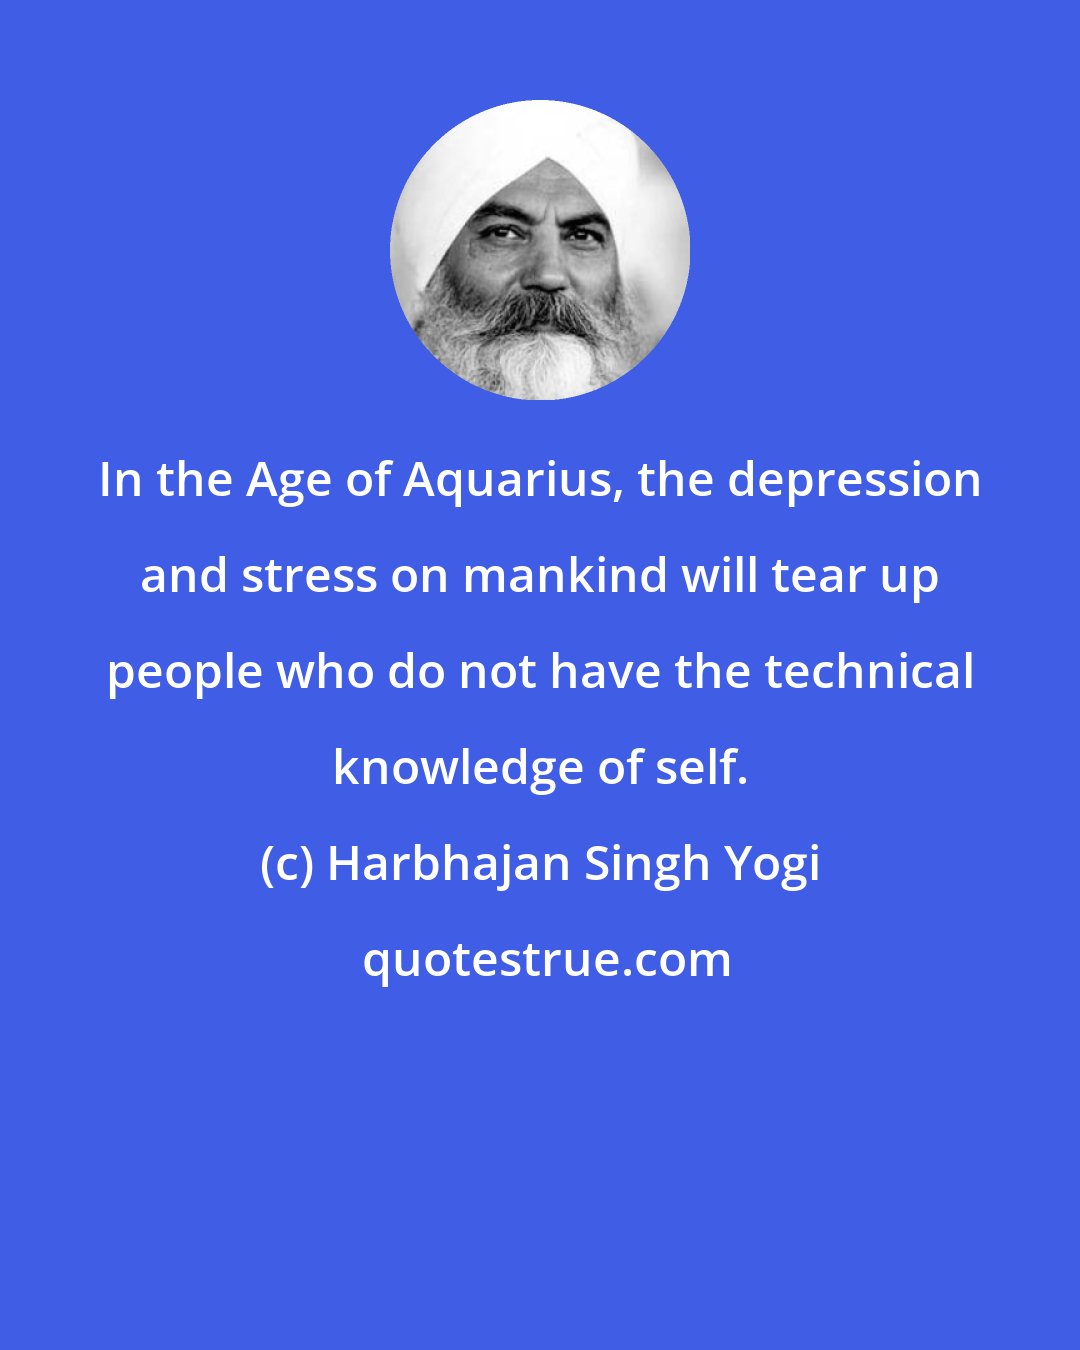 Harbhajan Singh Yogi: In the Age of Aquarius, the depression and stress on mankind will tear up people who do not have the technical knowledge of self.